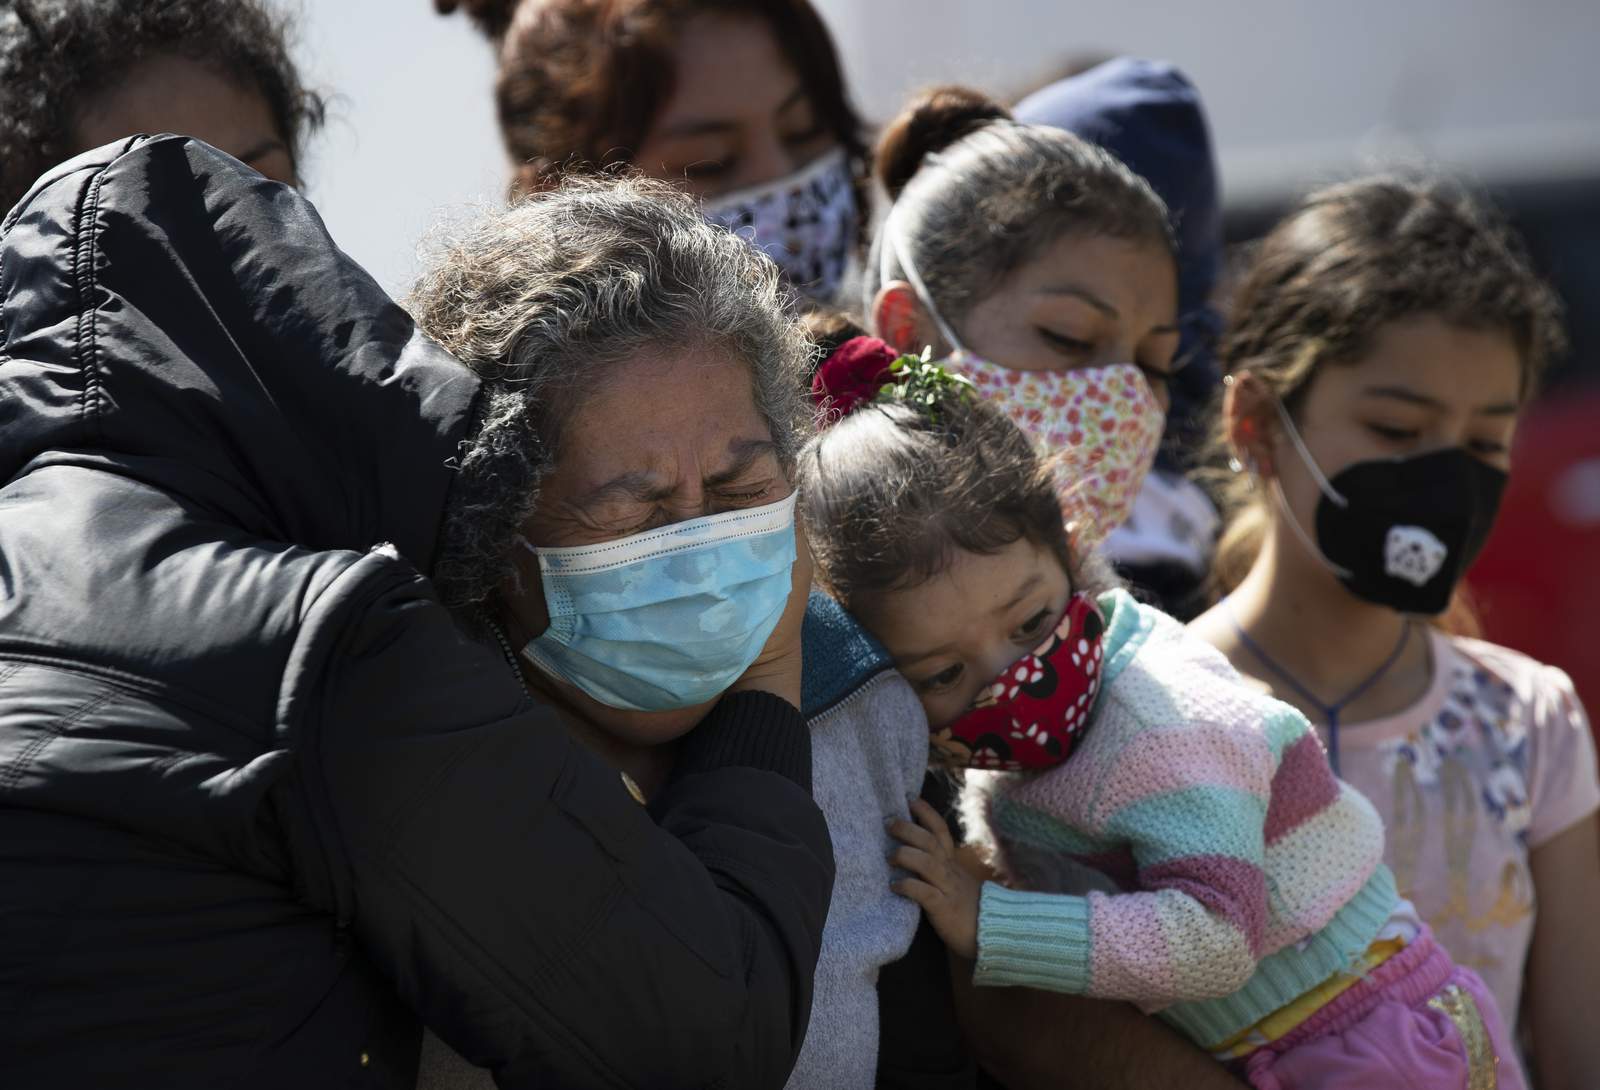 The Latest: Mexico health officials acknowledge higher toll